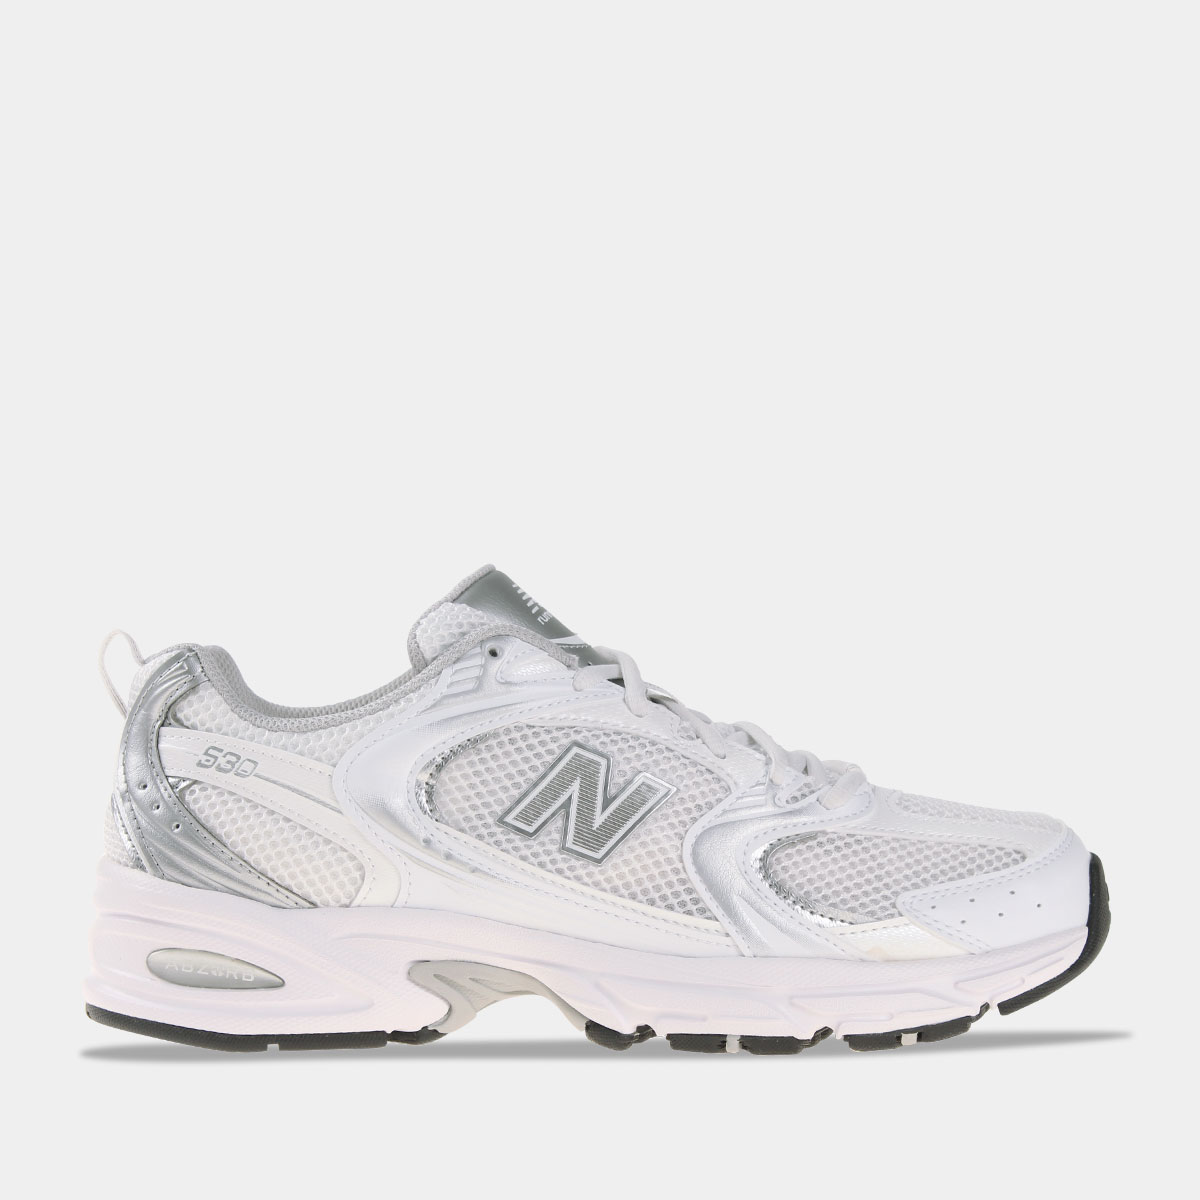 New Balance 530 White/Silver unisex sneakers